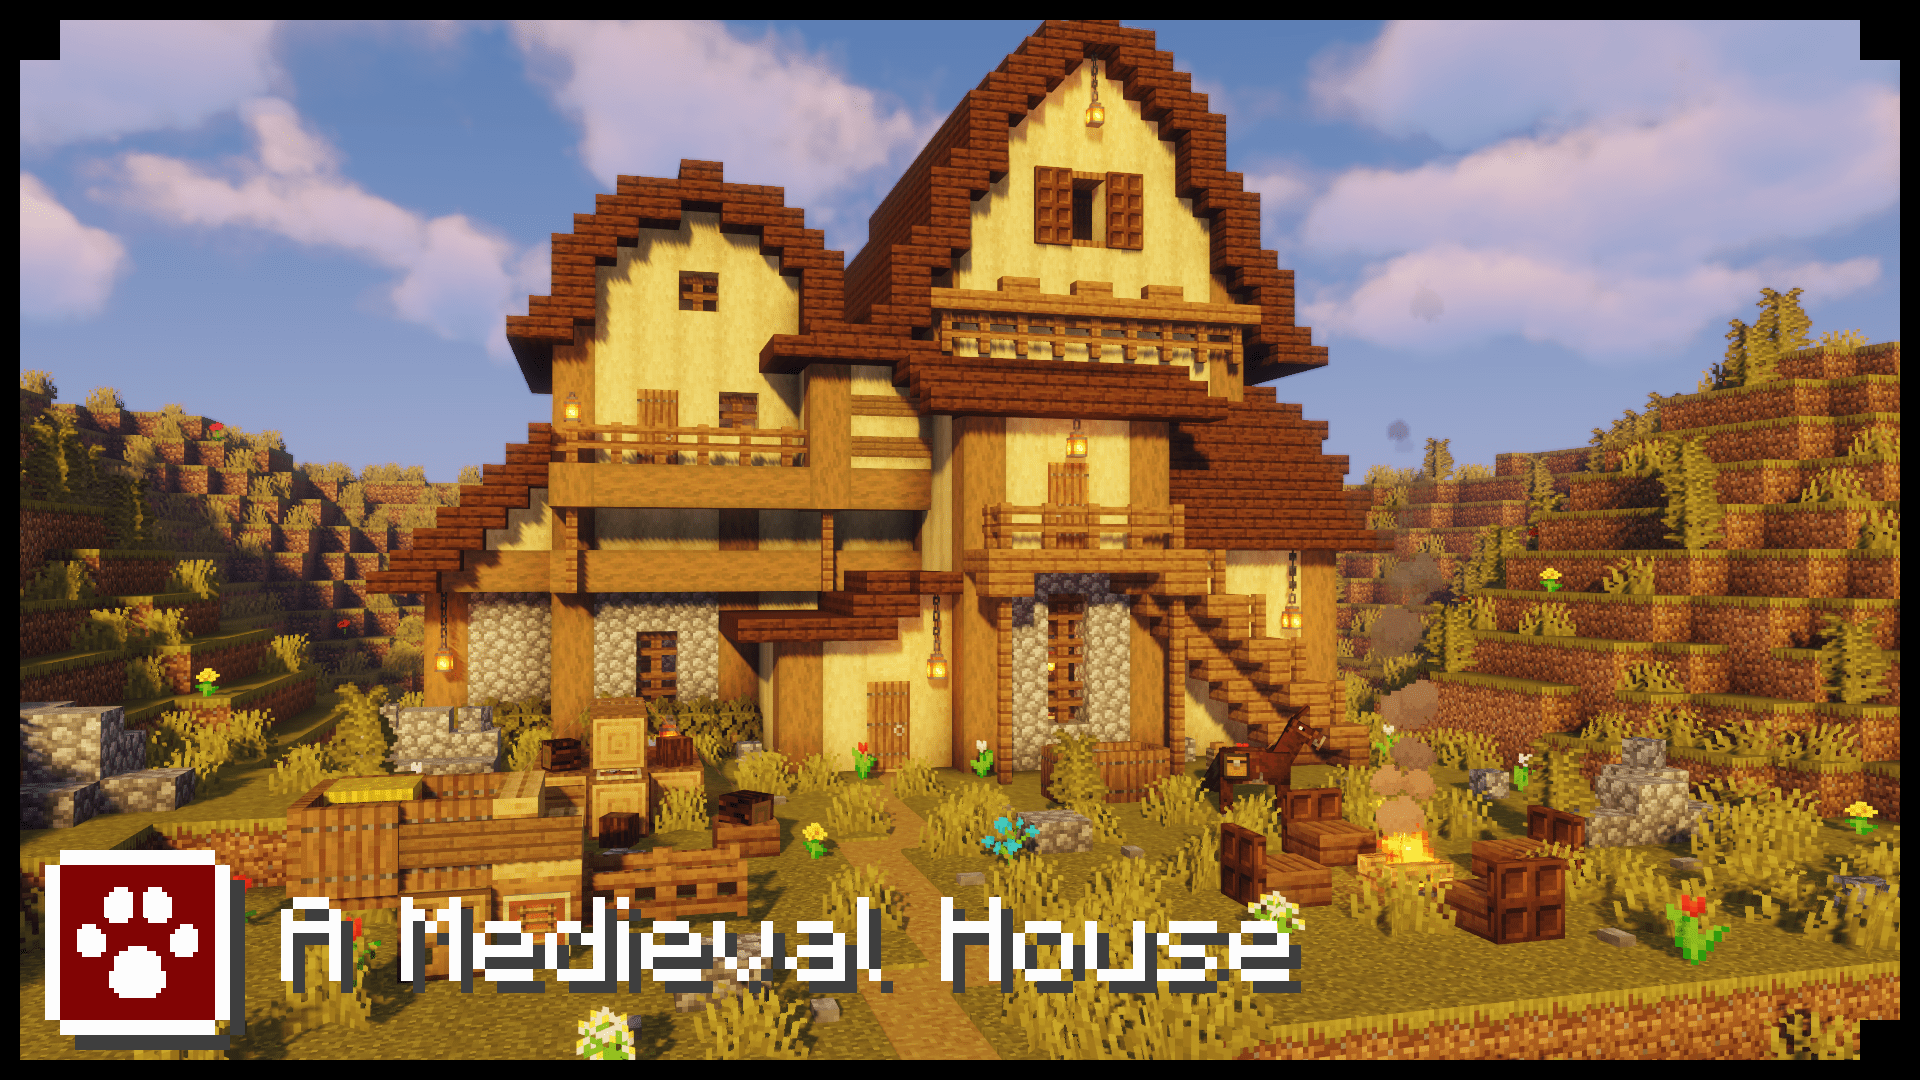 Download «A Medieval House #01» (2 mb) map for Minecraft